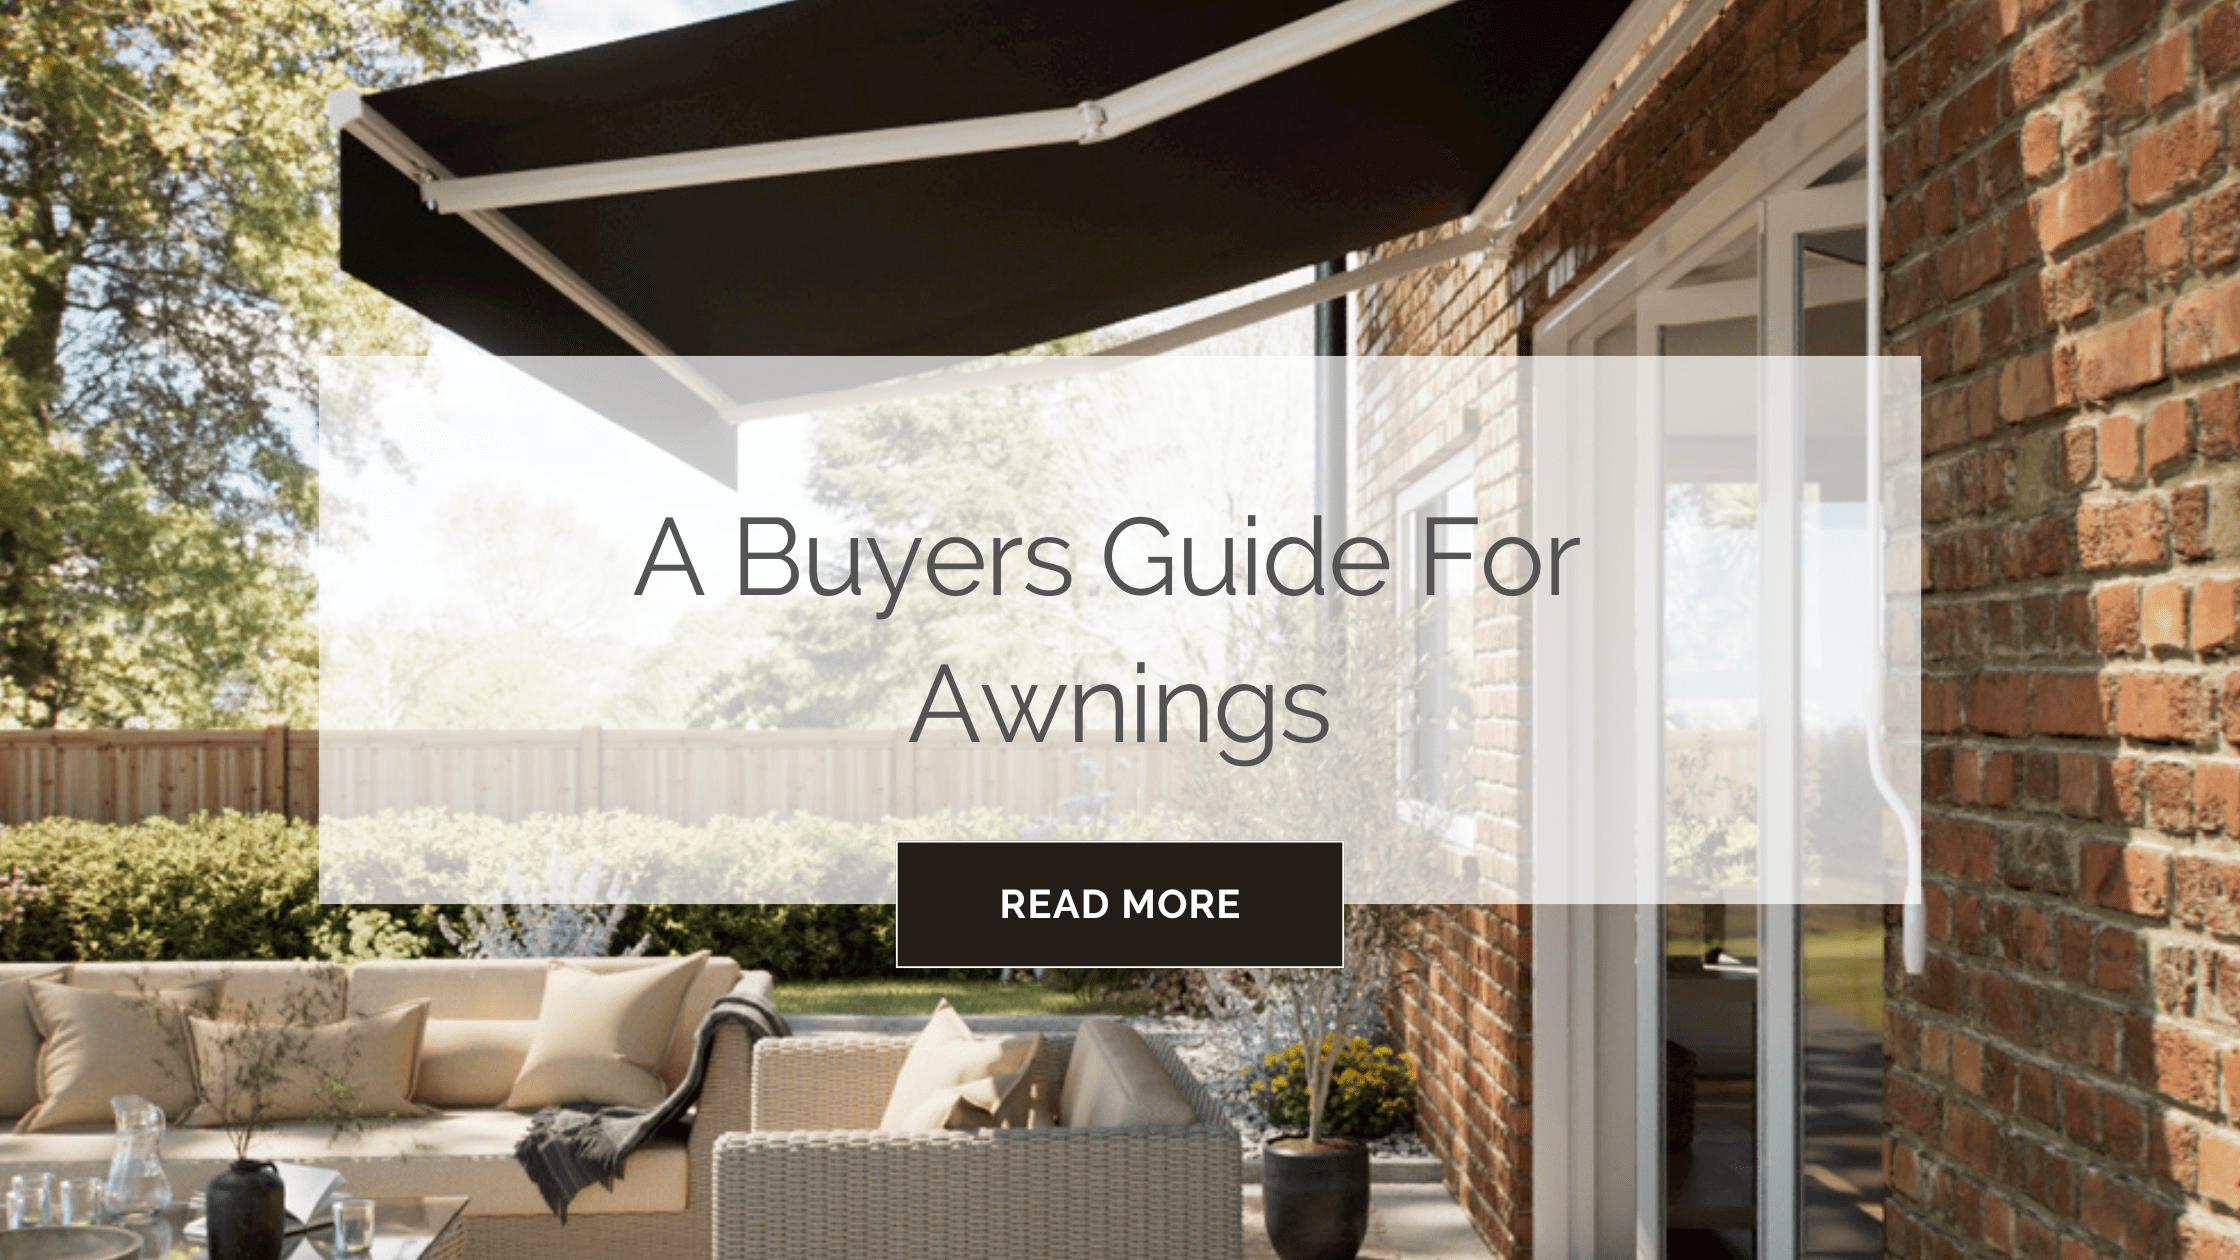 A Buyers Guide for Awnings